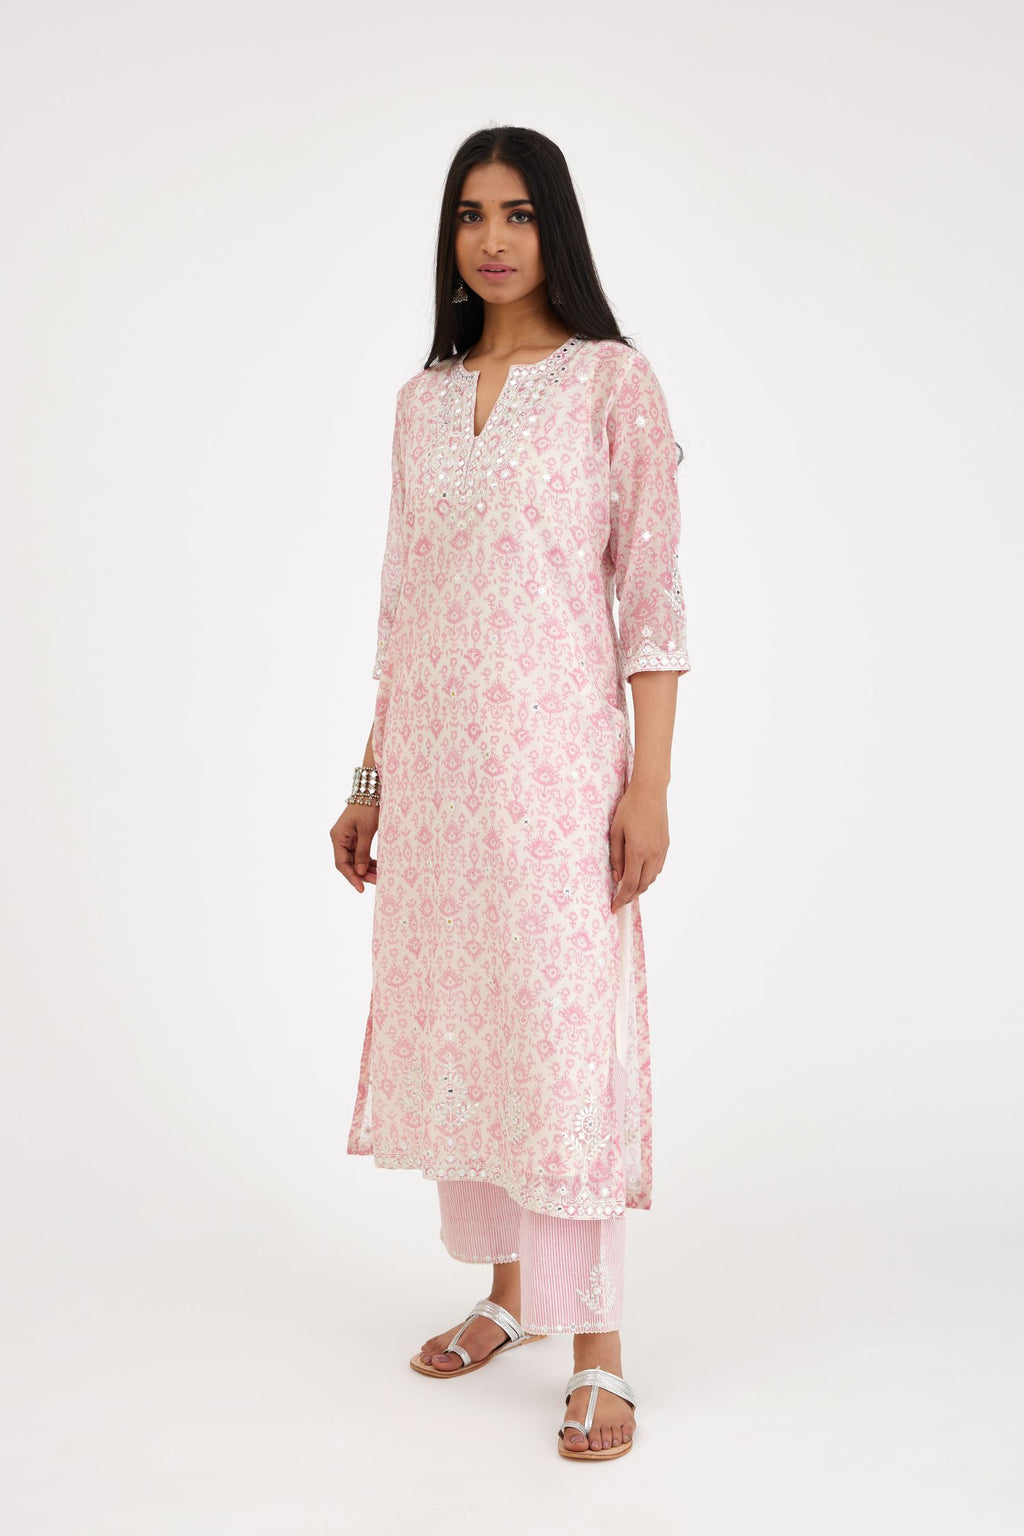 Ikat design pink and off white hand block-printed Cotton Chanderi straight long kurta set with round neck, highlighted with off-white thread and mirror embroidery.